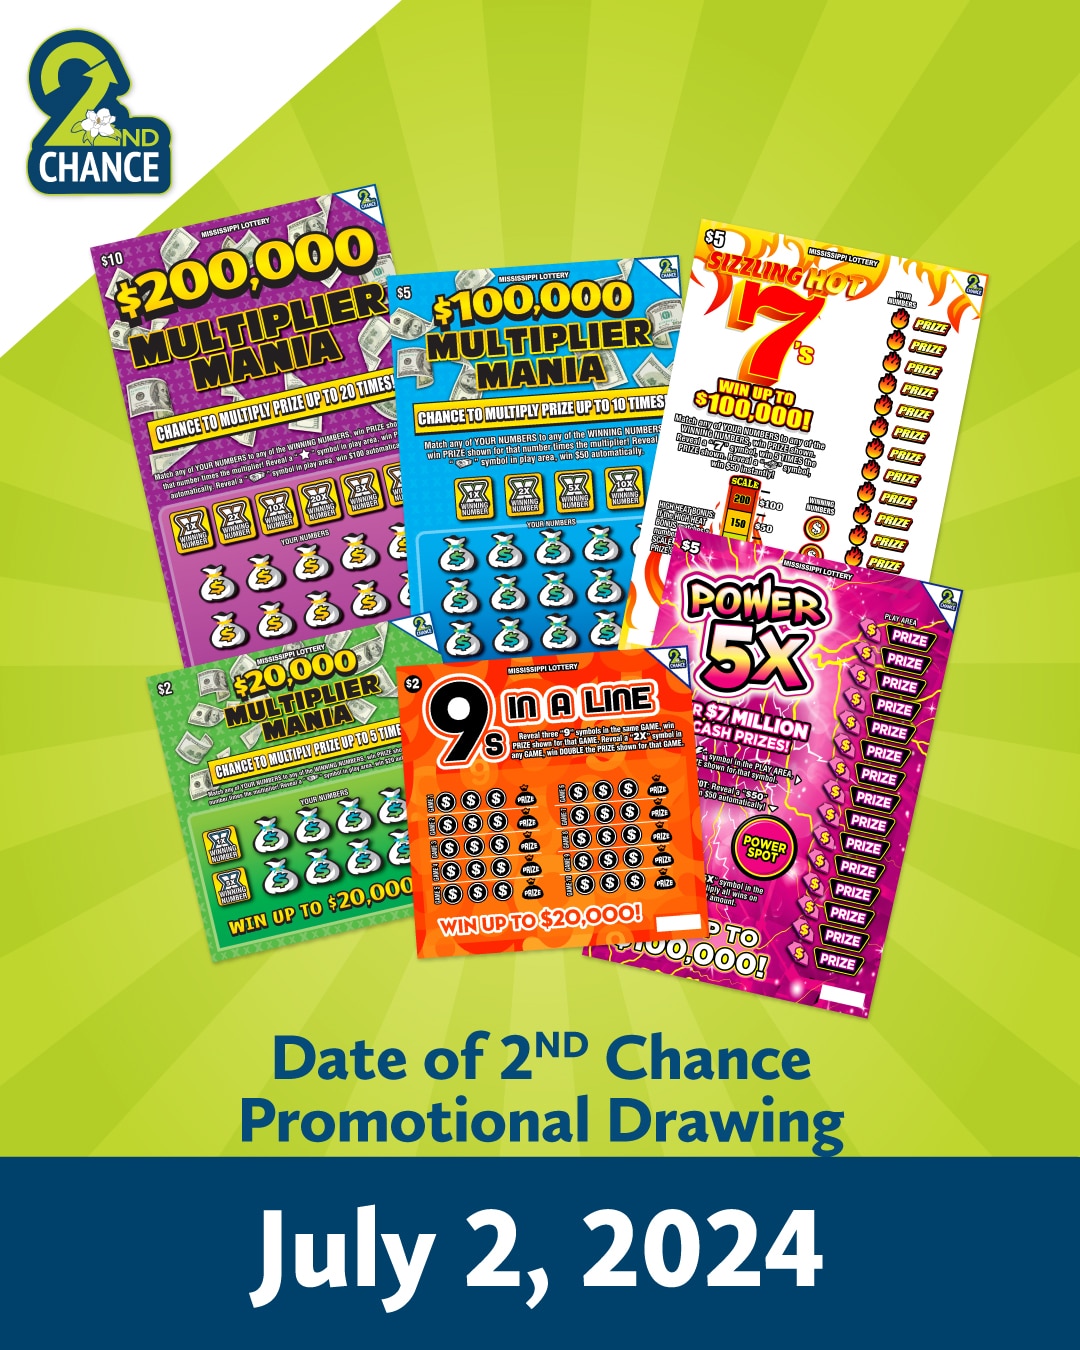 2nd Chance Promotional Drawing 7/2/2024 Mississippi Lottery